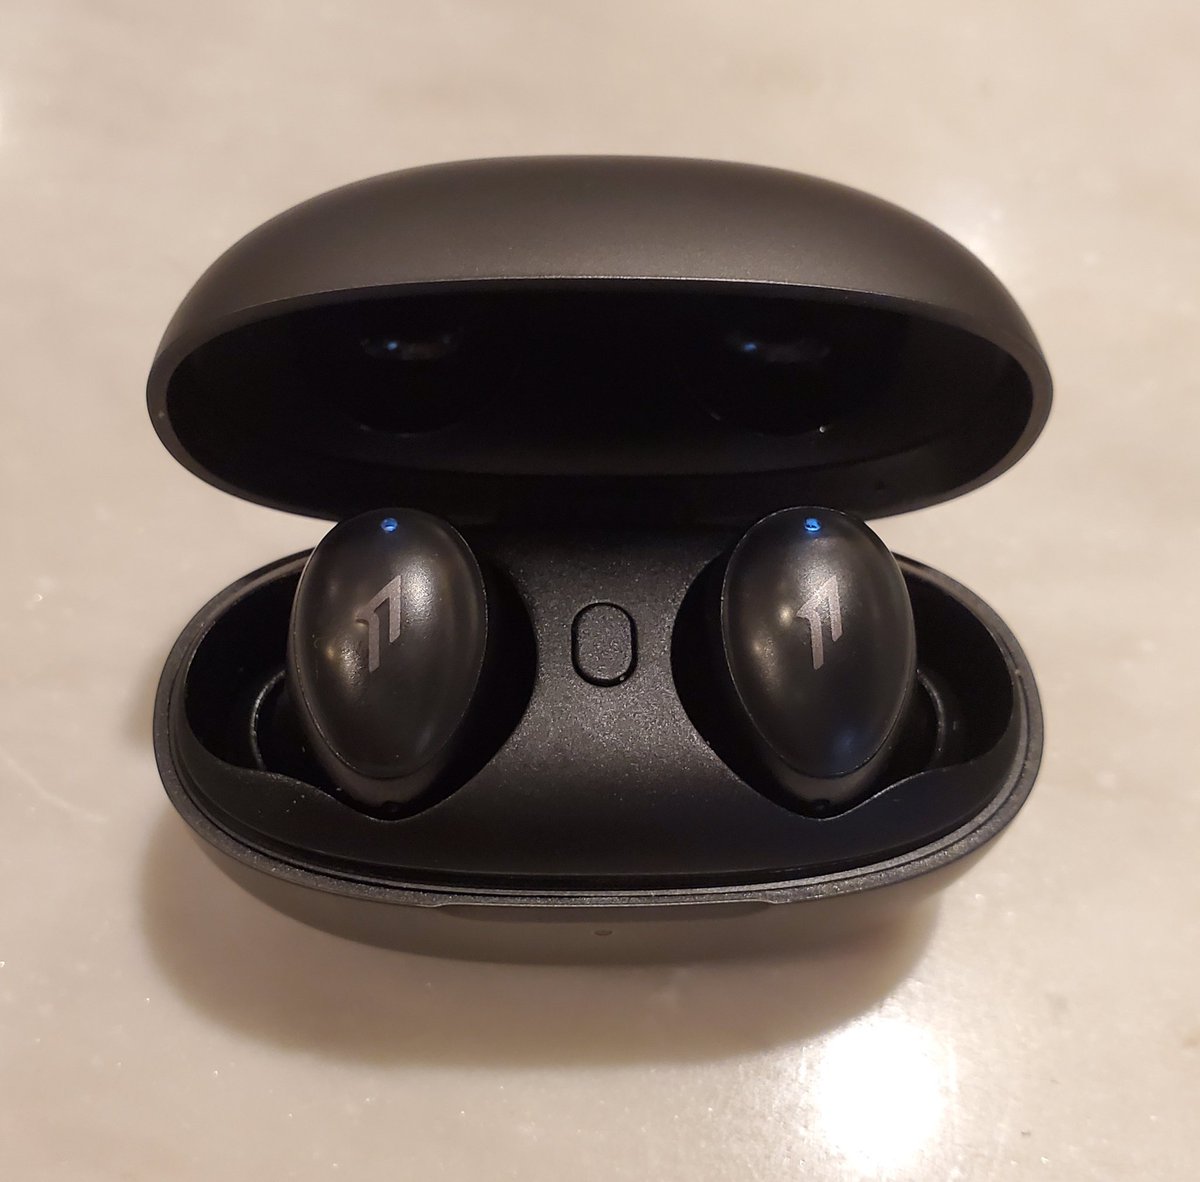 👍for @1MoreGlobal new #ColorBuds2 ANC earbuds, good balanced sound (not too bassy), maintain Bluetooth connection & switch devices easily, stay snug in 👂. Most callers can hear mic well, some 'end of tunnel sound,' if U are using mostly for 🎶, good buds 4 the $ #1MORETesting